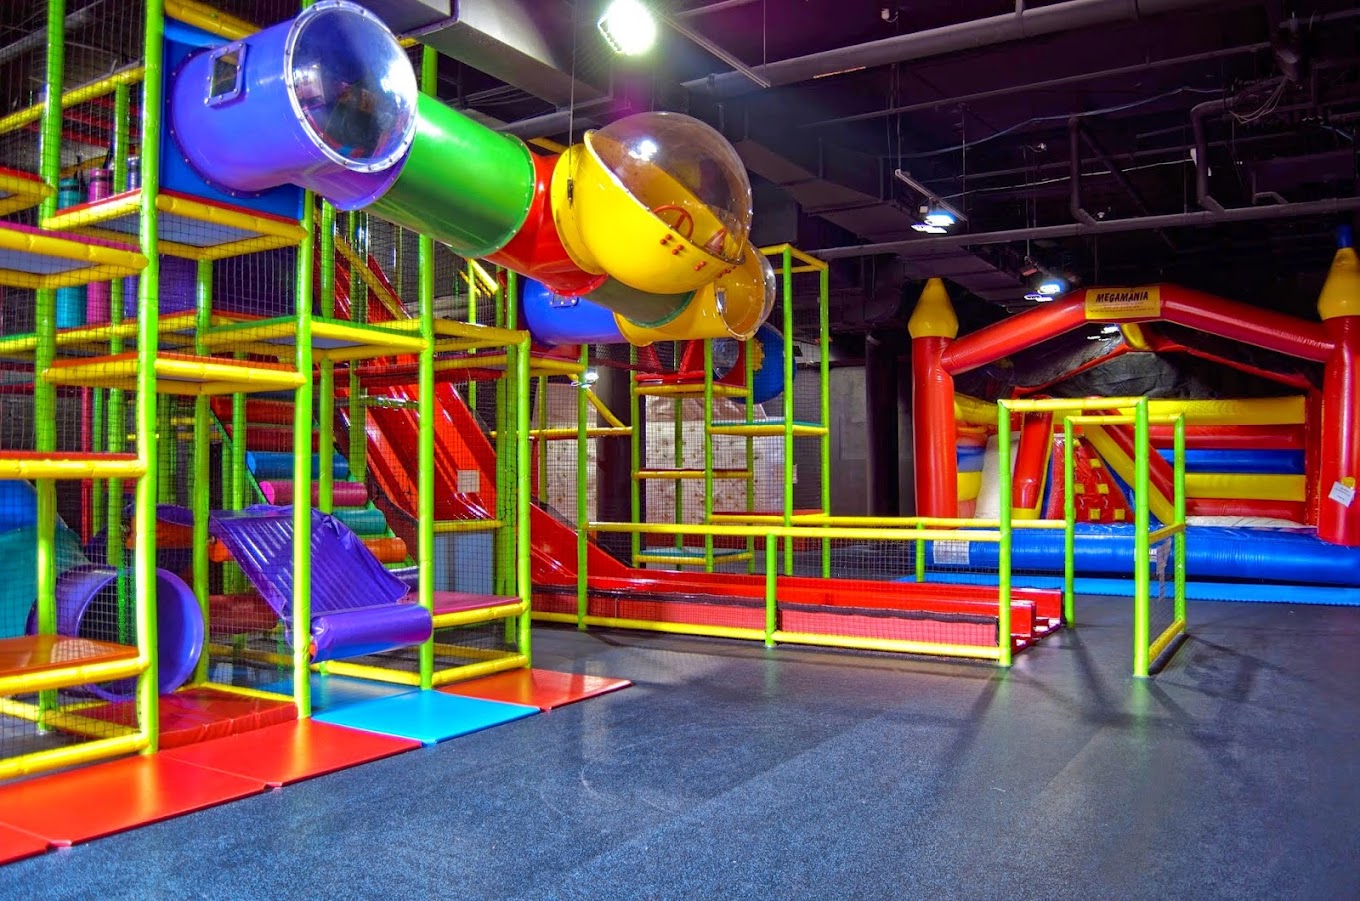 Over 5's play area